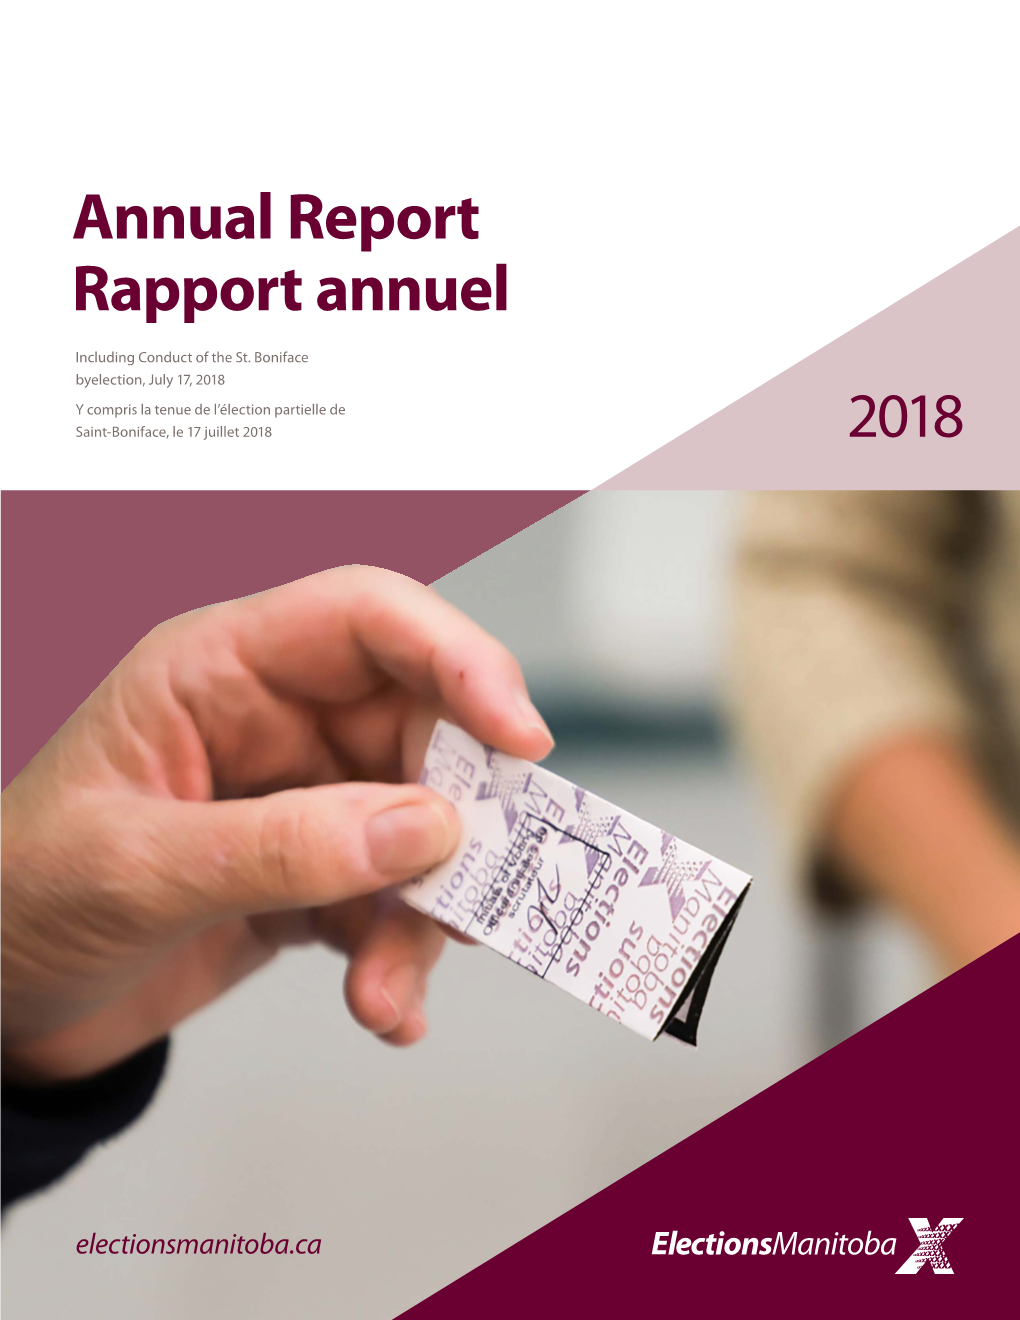 2018 Annual Report of the Chief Electoral Officer